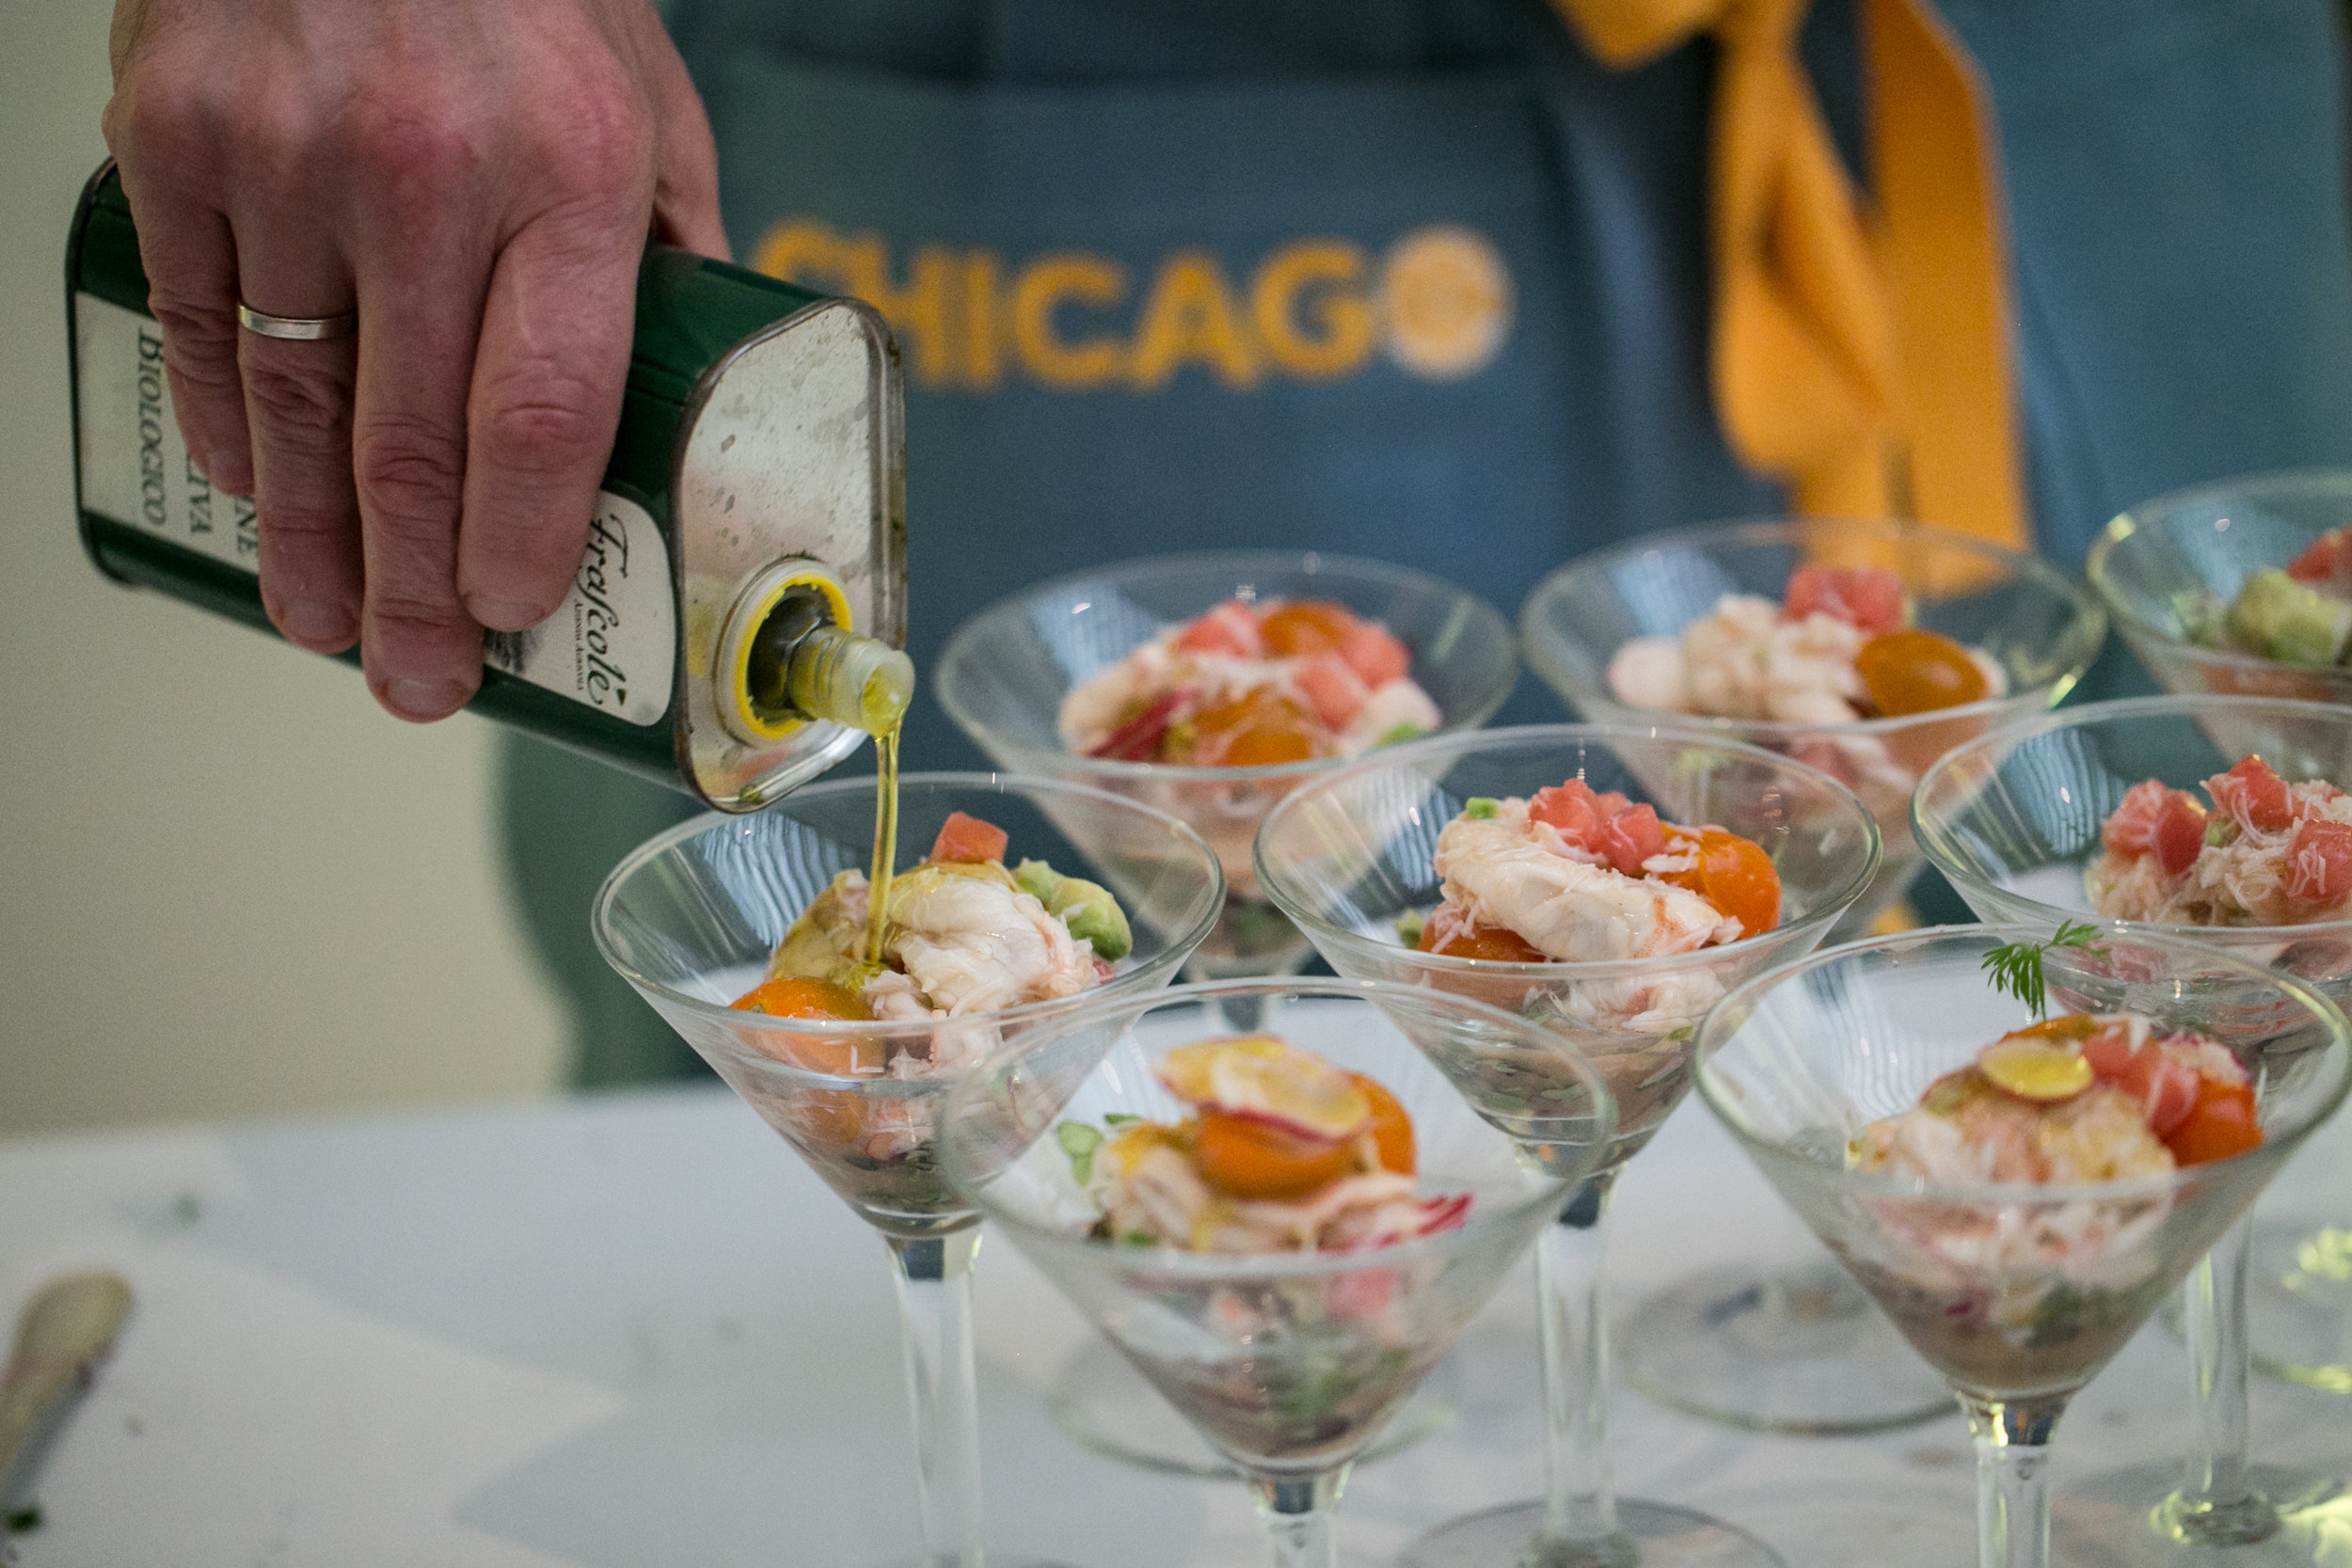  Appetizers at Alex’s Lemonade Stand Chicago event 